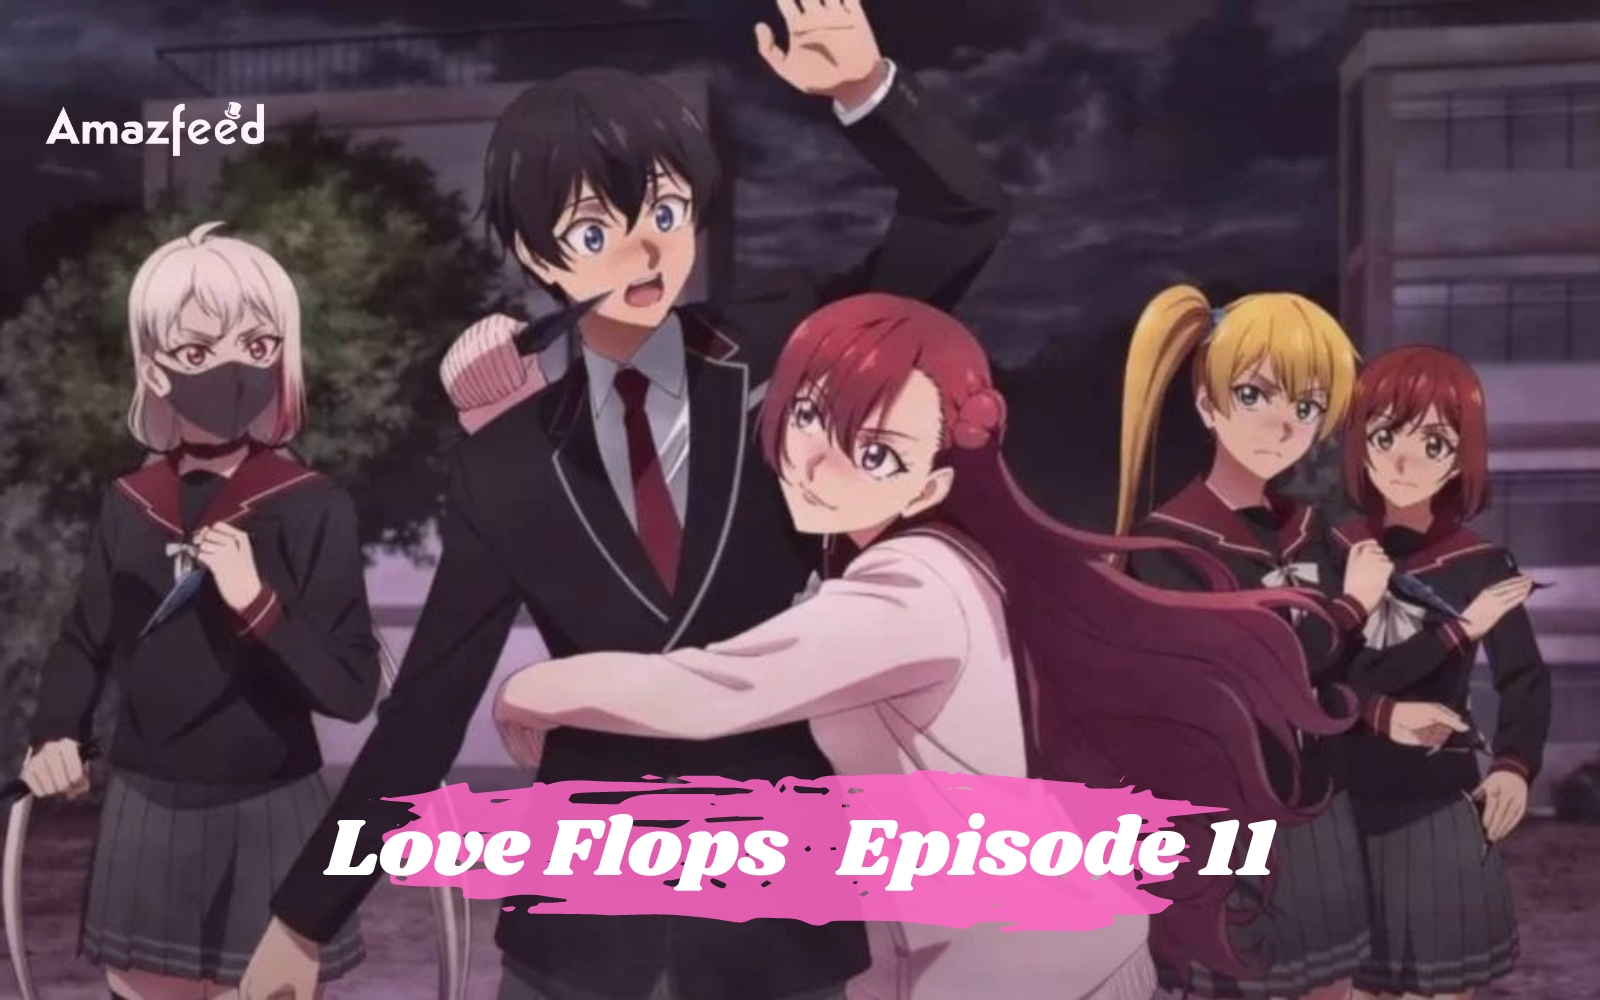 11th 'Love Flops' Anime Episode Previewed